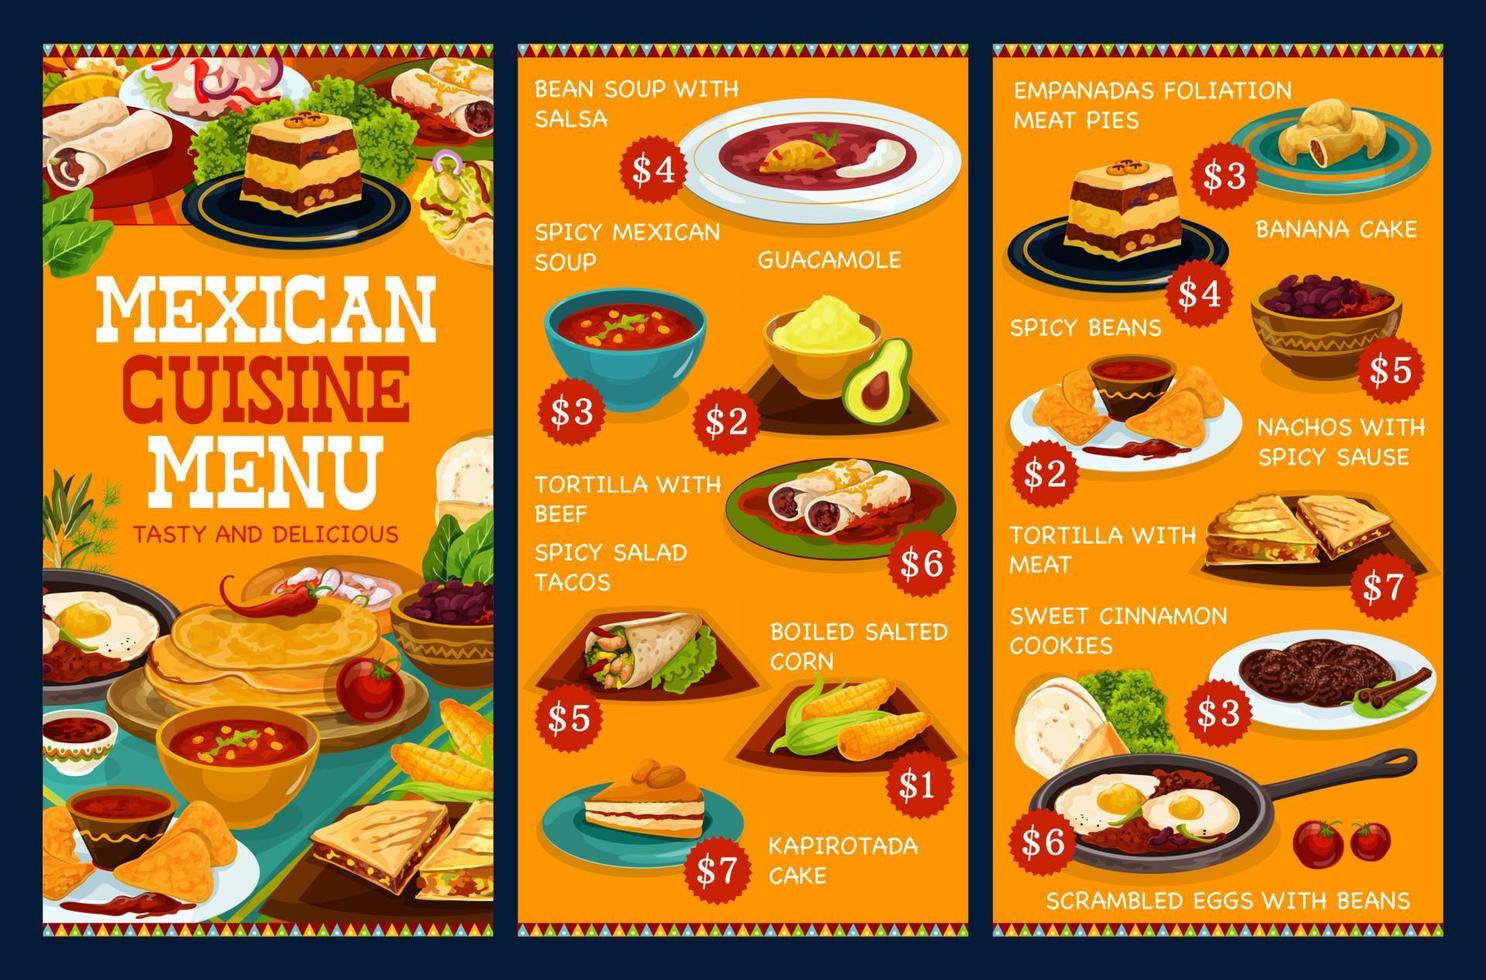 Authentic Mexican cuisine food, Mexico cafe menu vector